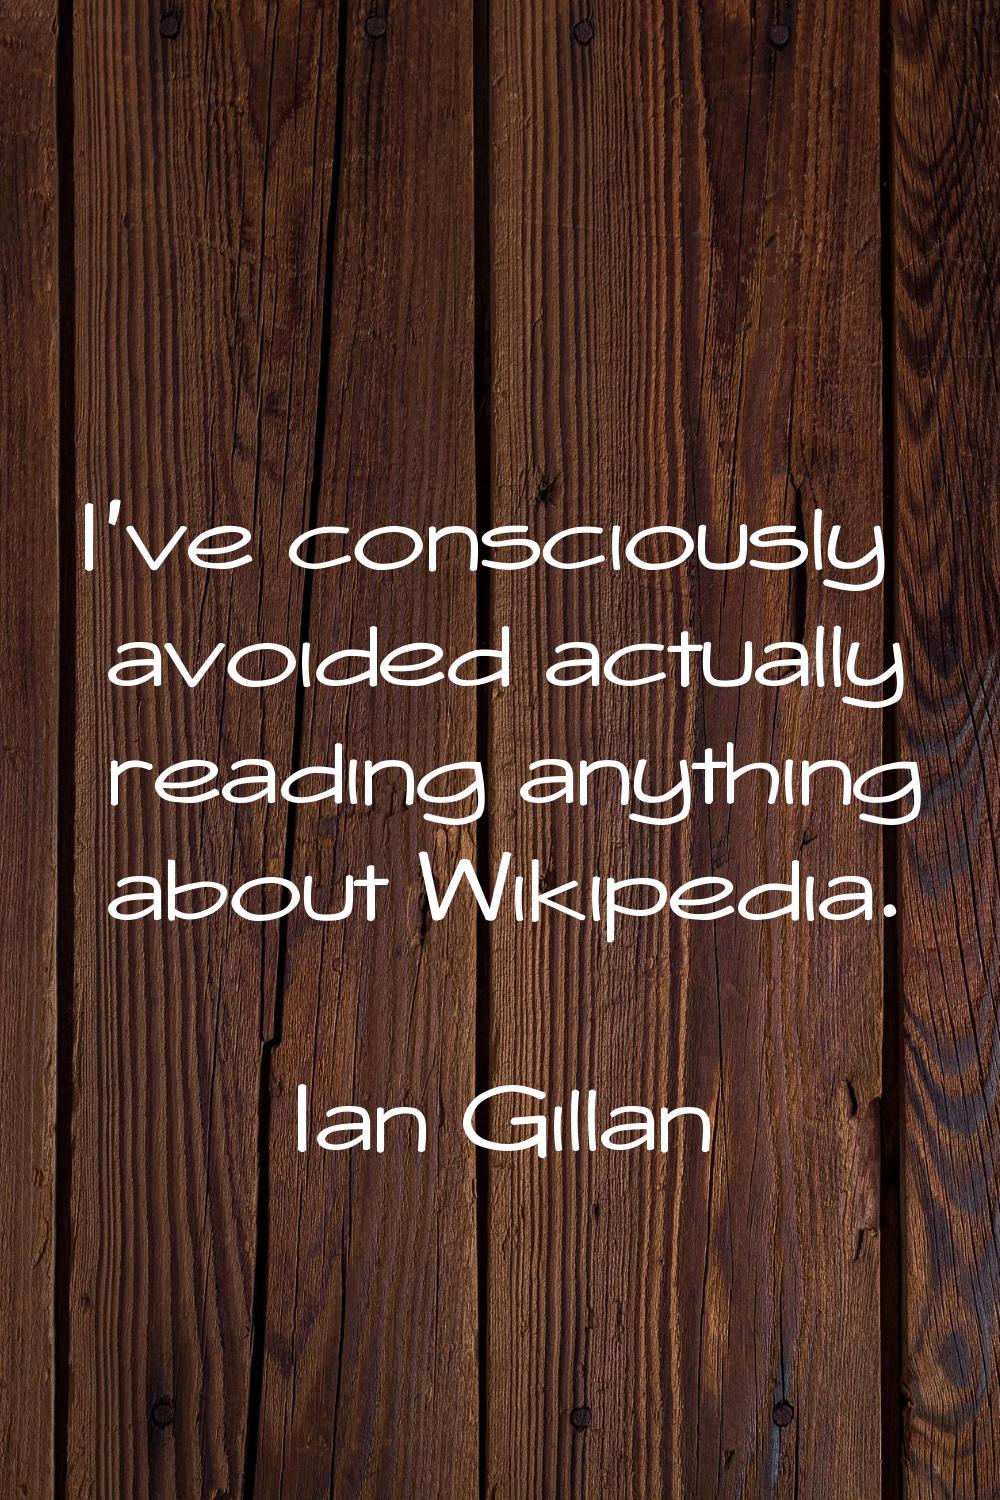 I've consciously avoided actually reading anything about Wikipedia.